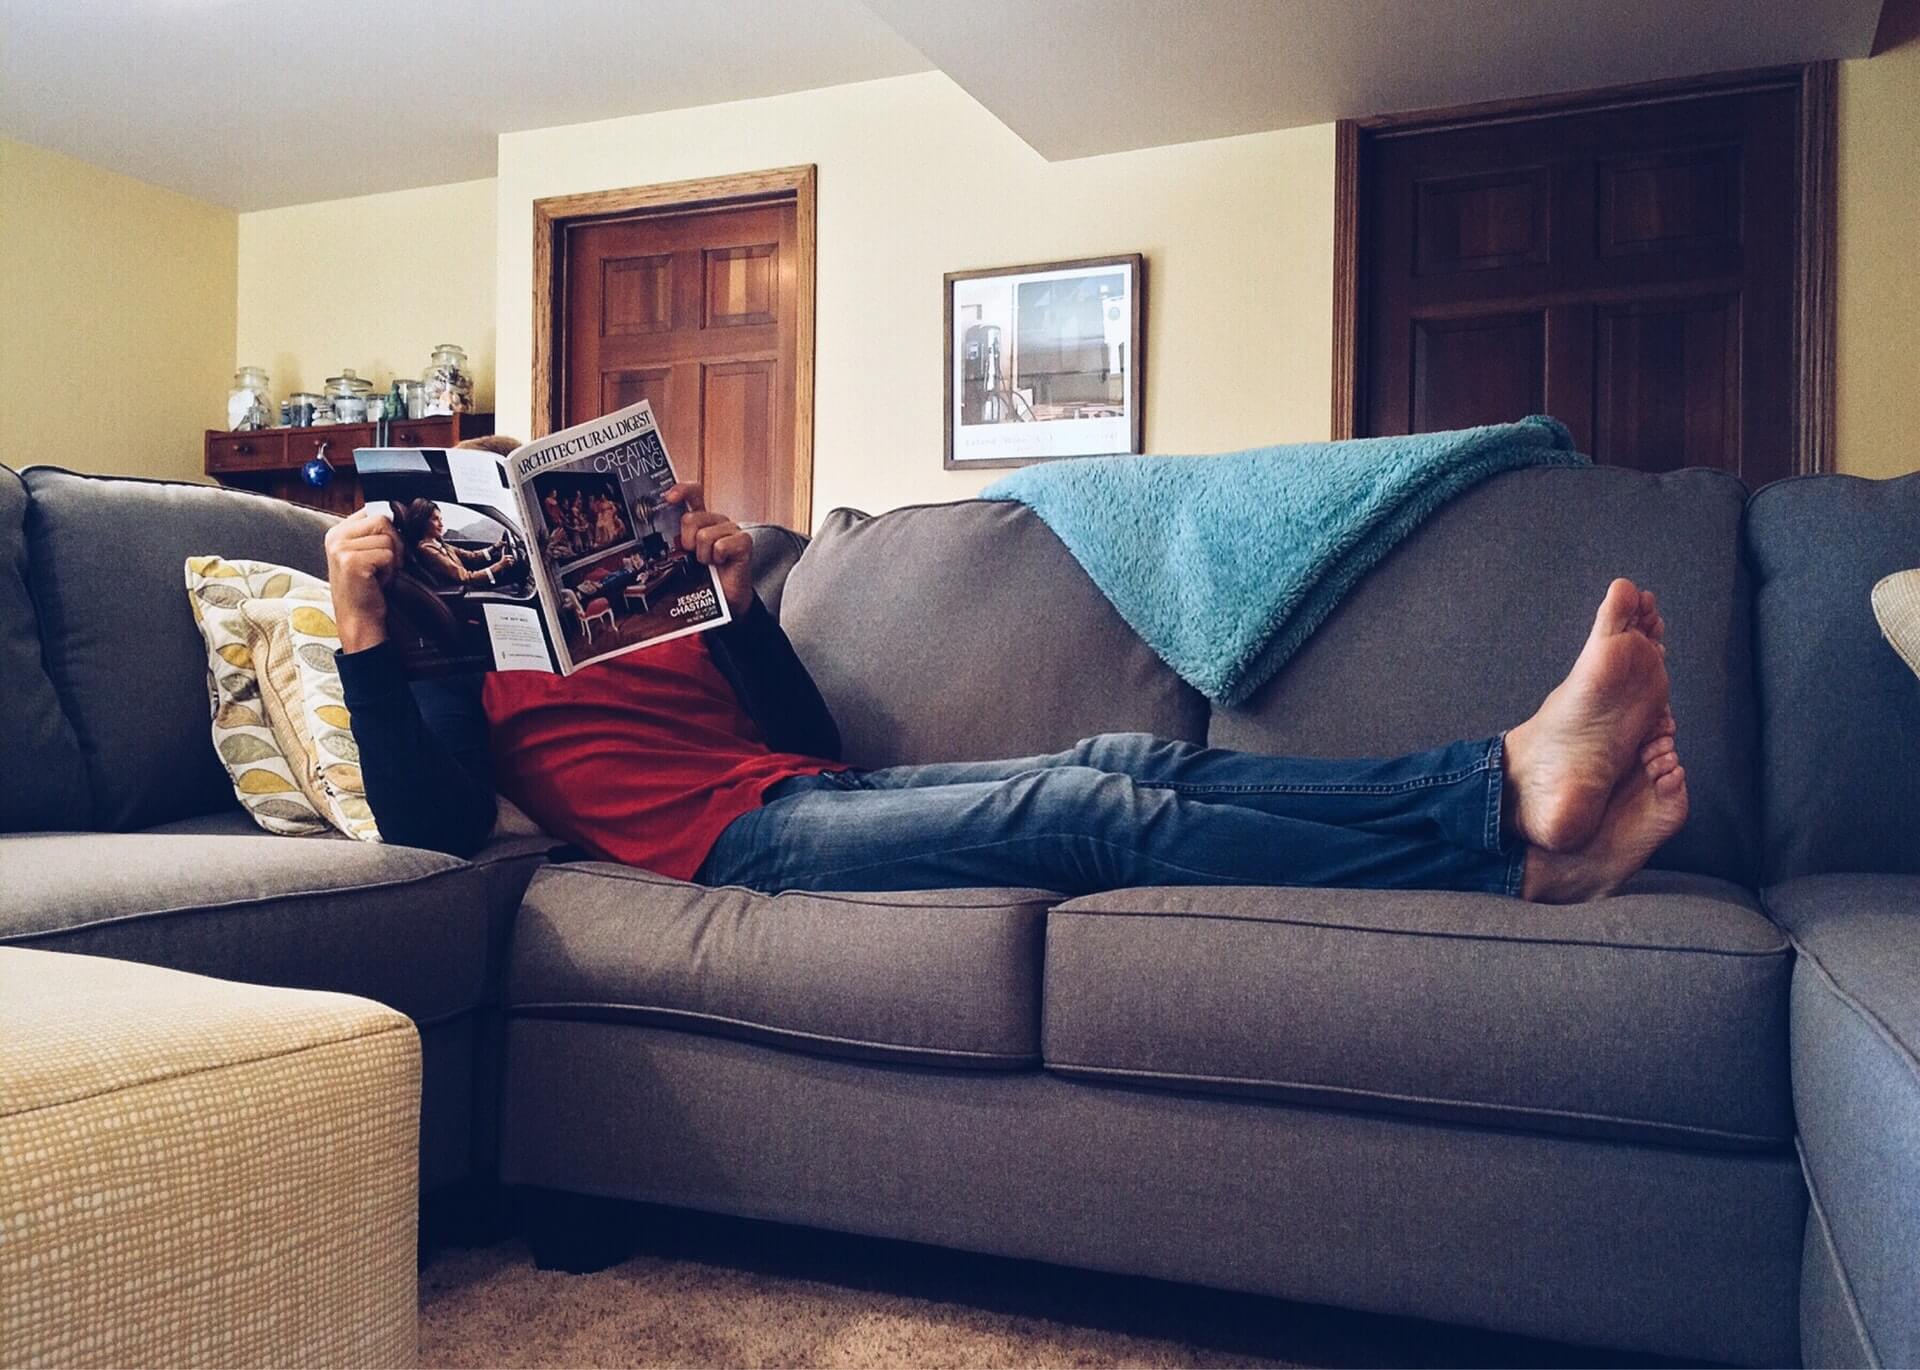 Guy sitting and reading on a couch